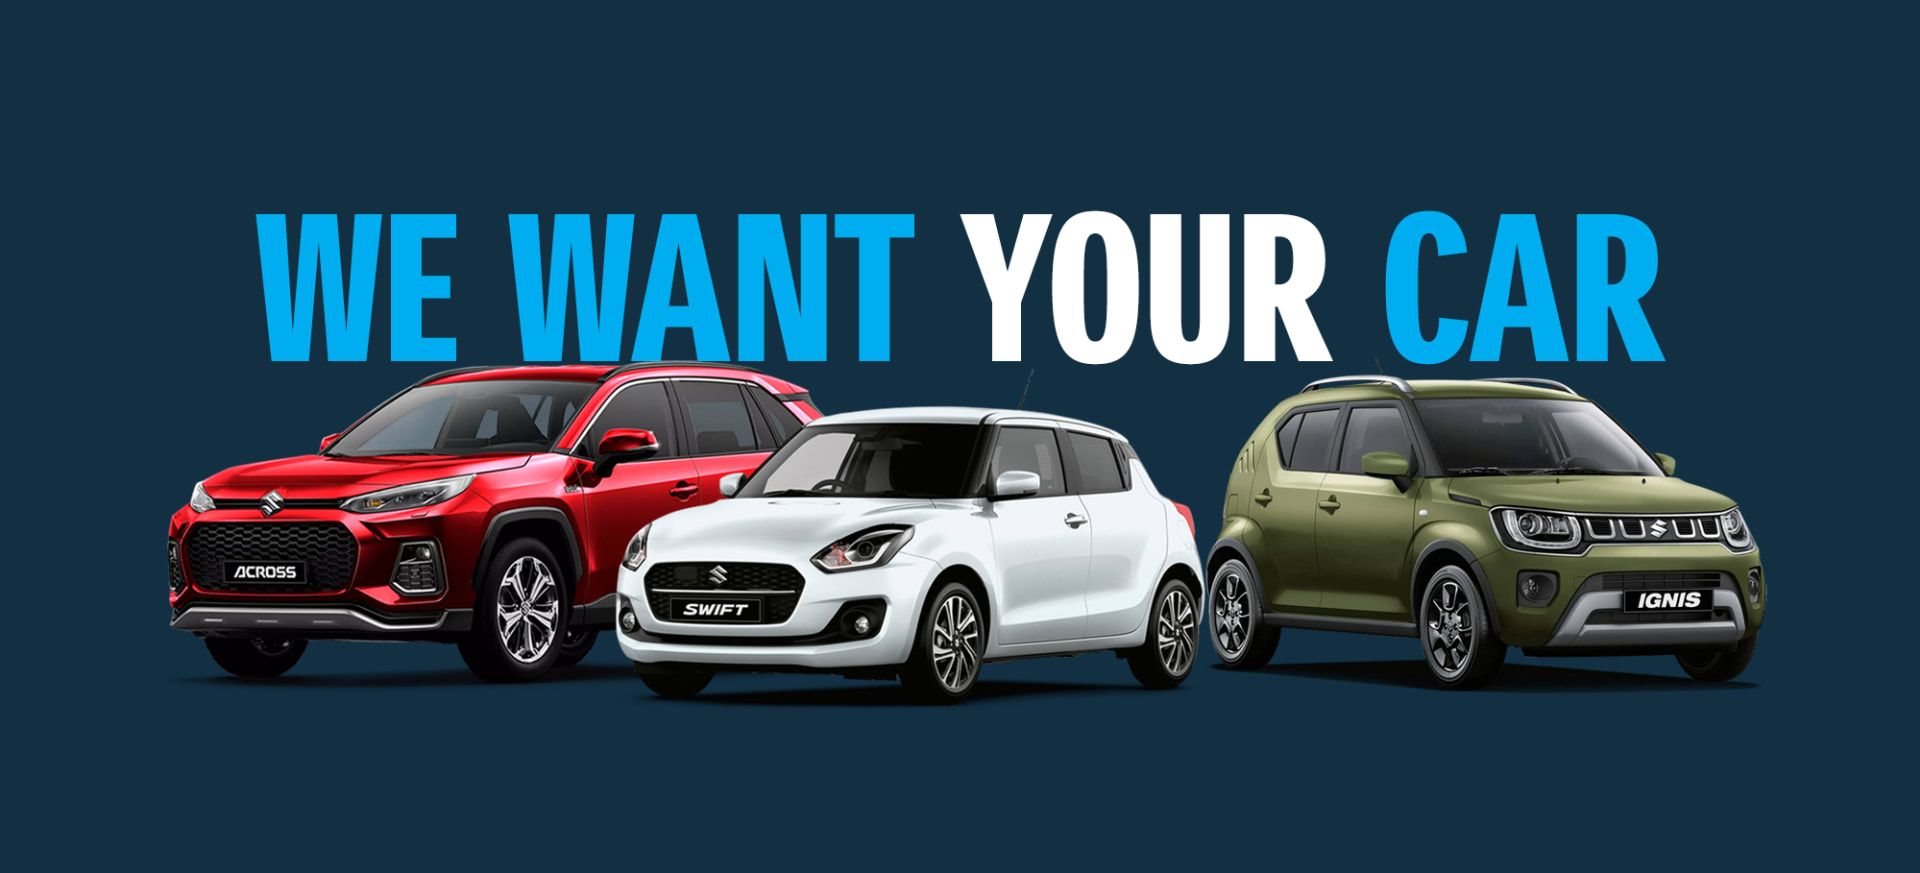 WE WANT YOUR CAR